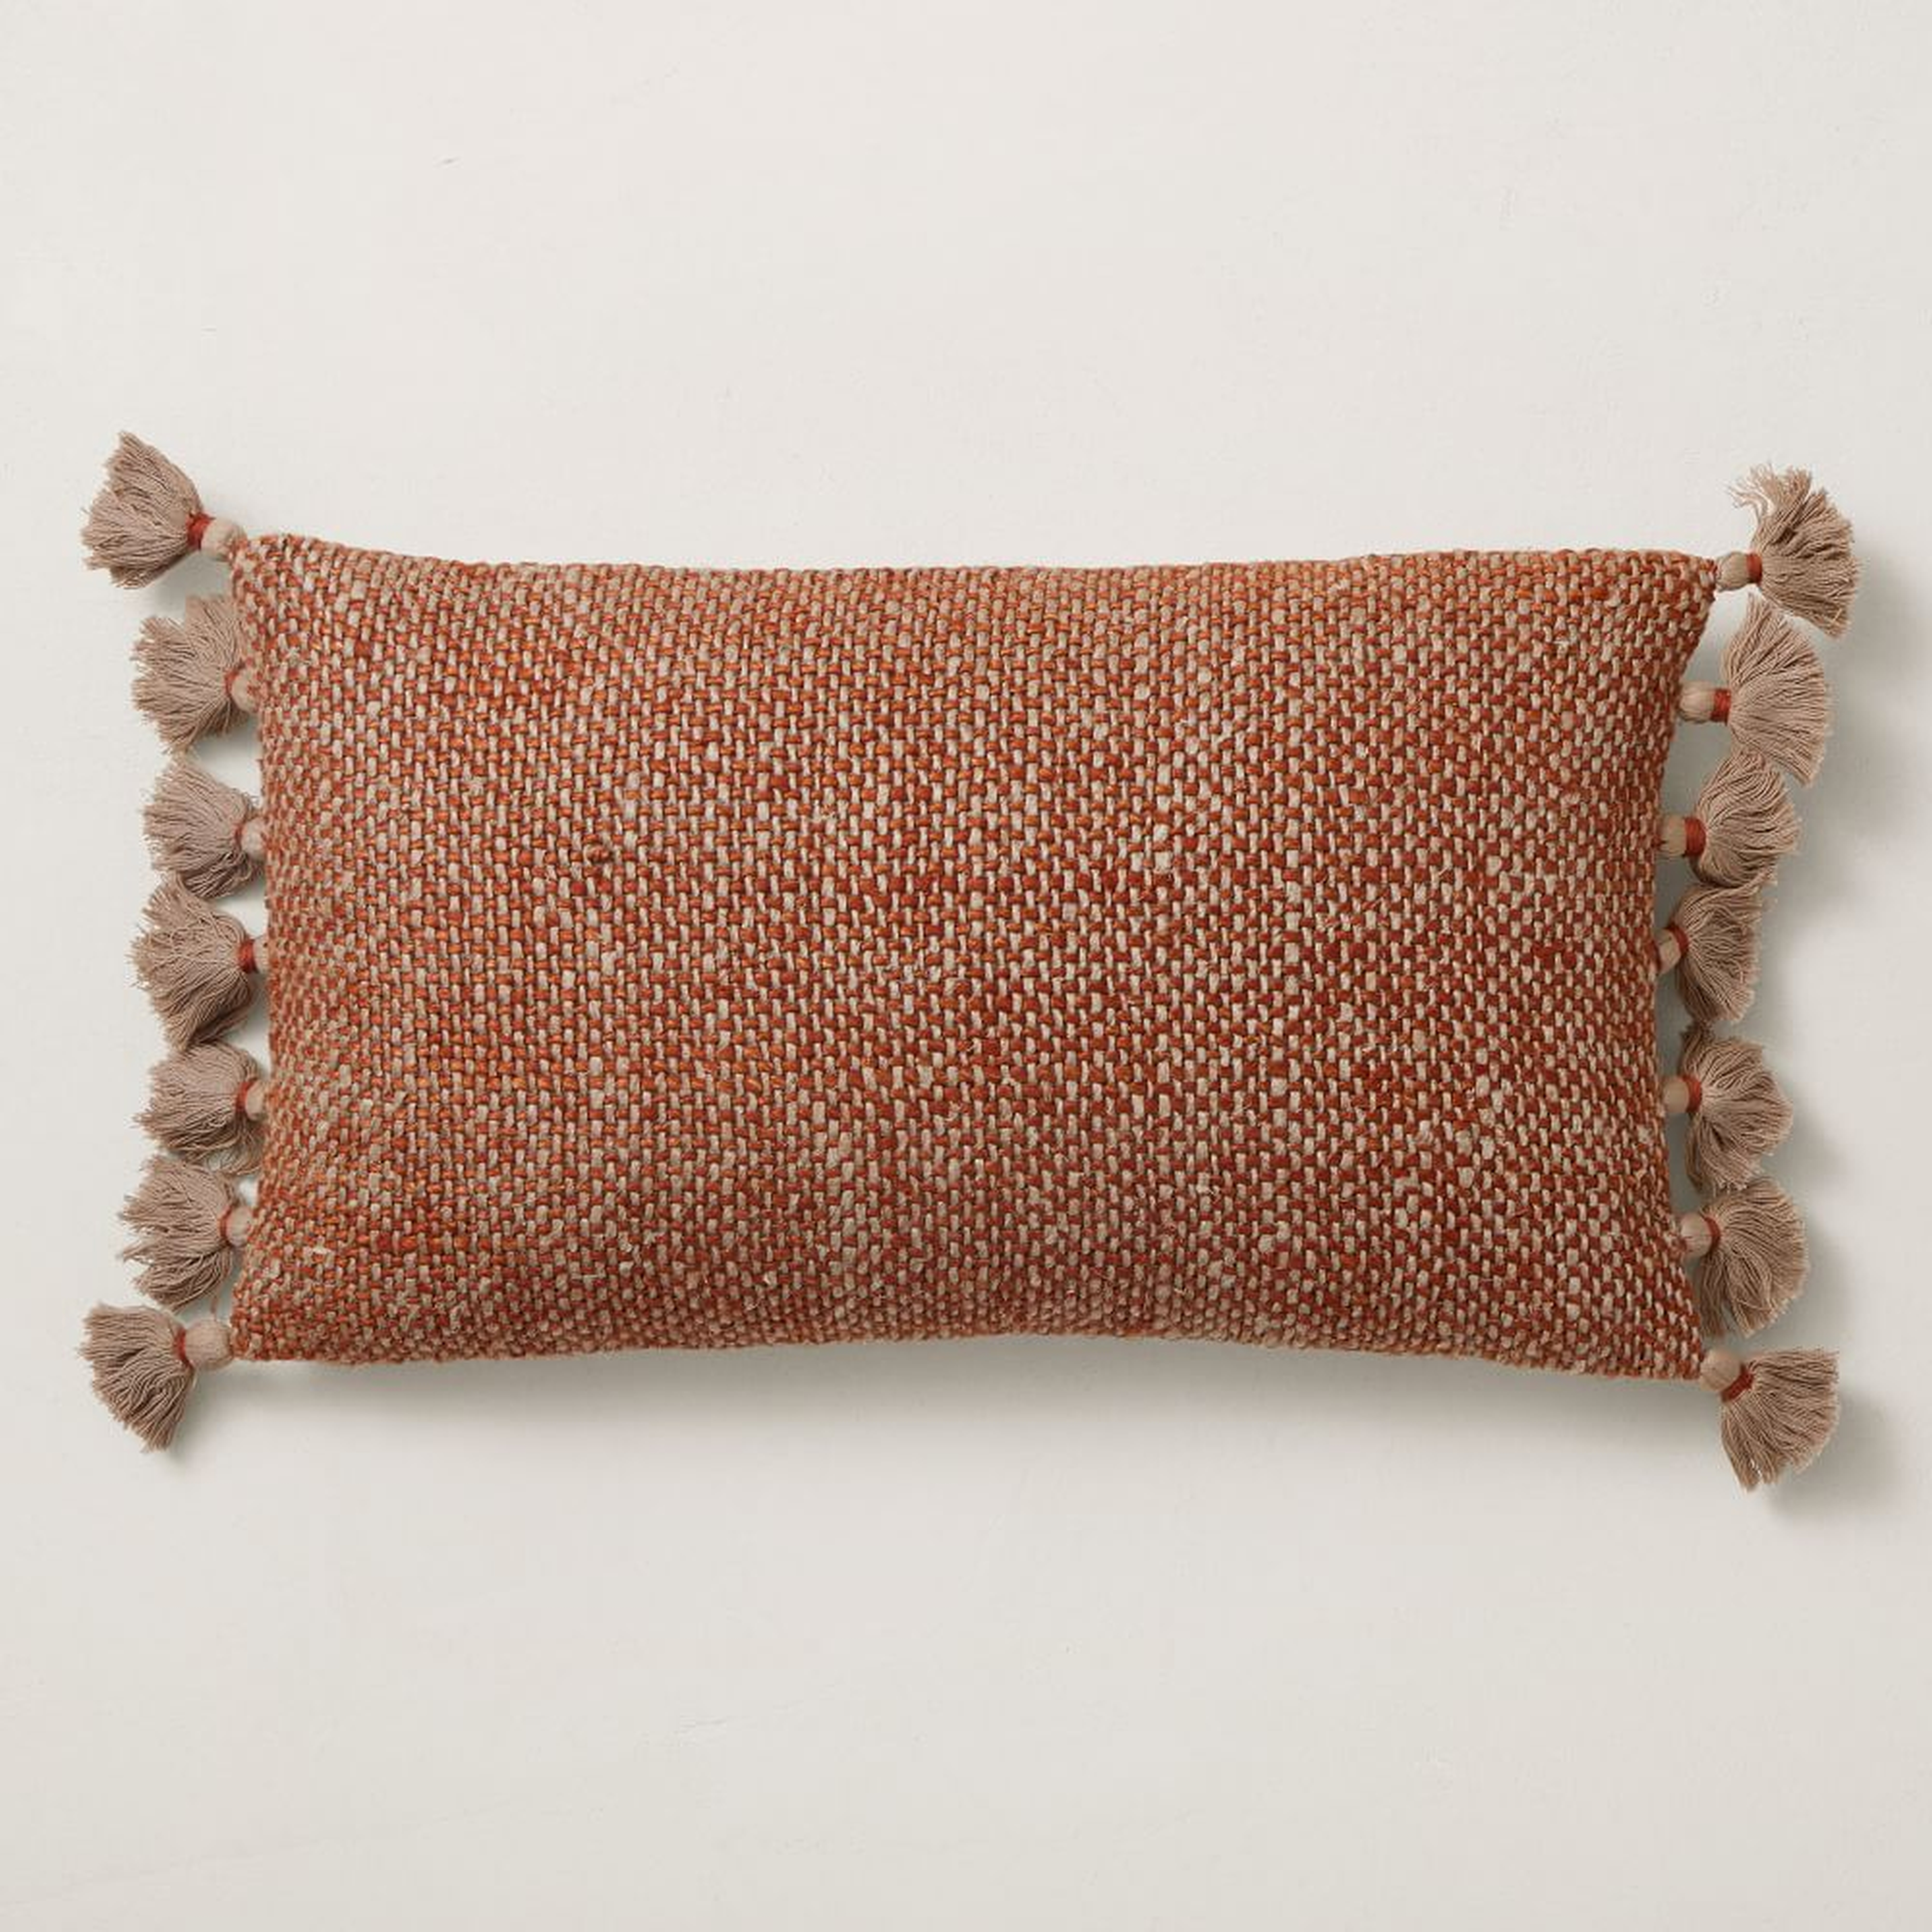 Two Tone Chunky Linen Tassels Pillow Cover, 12"x21", Copper, Set of 2 - West Elm